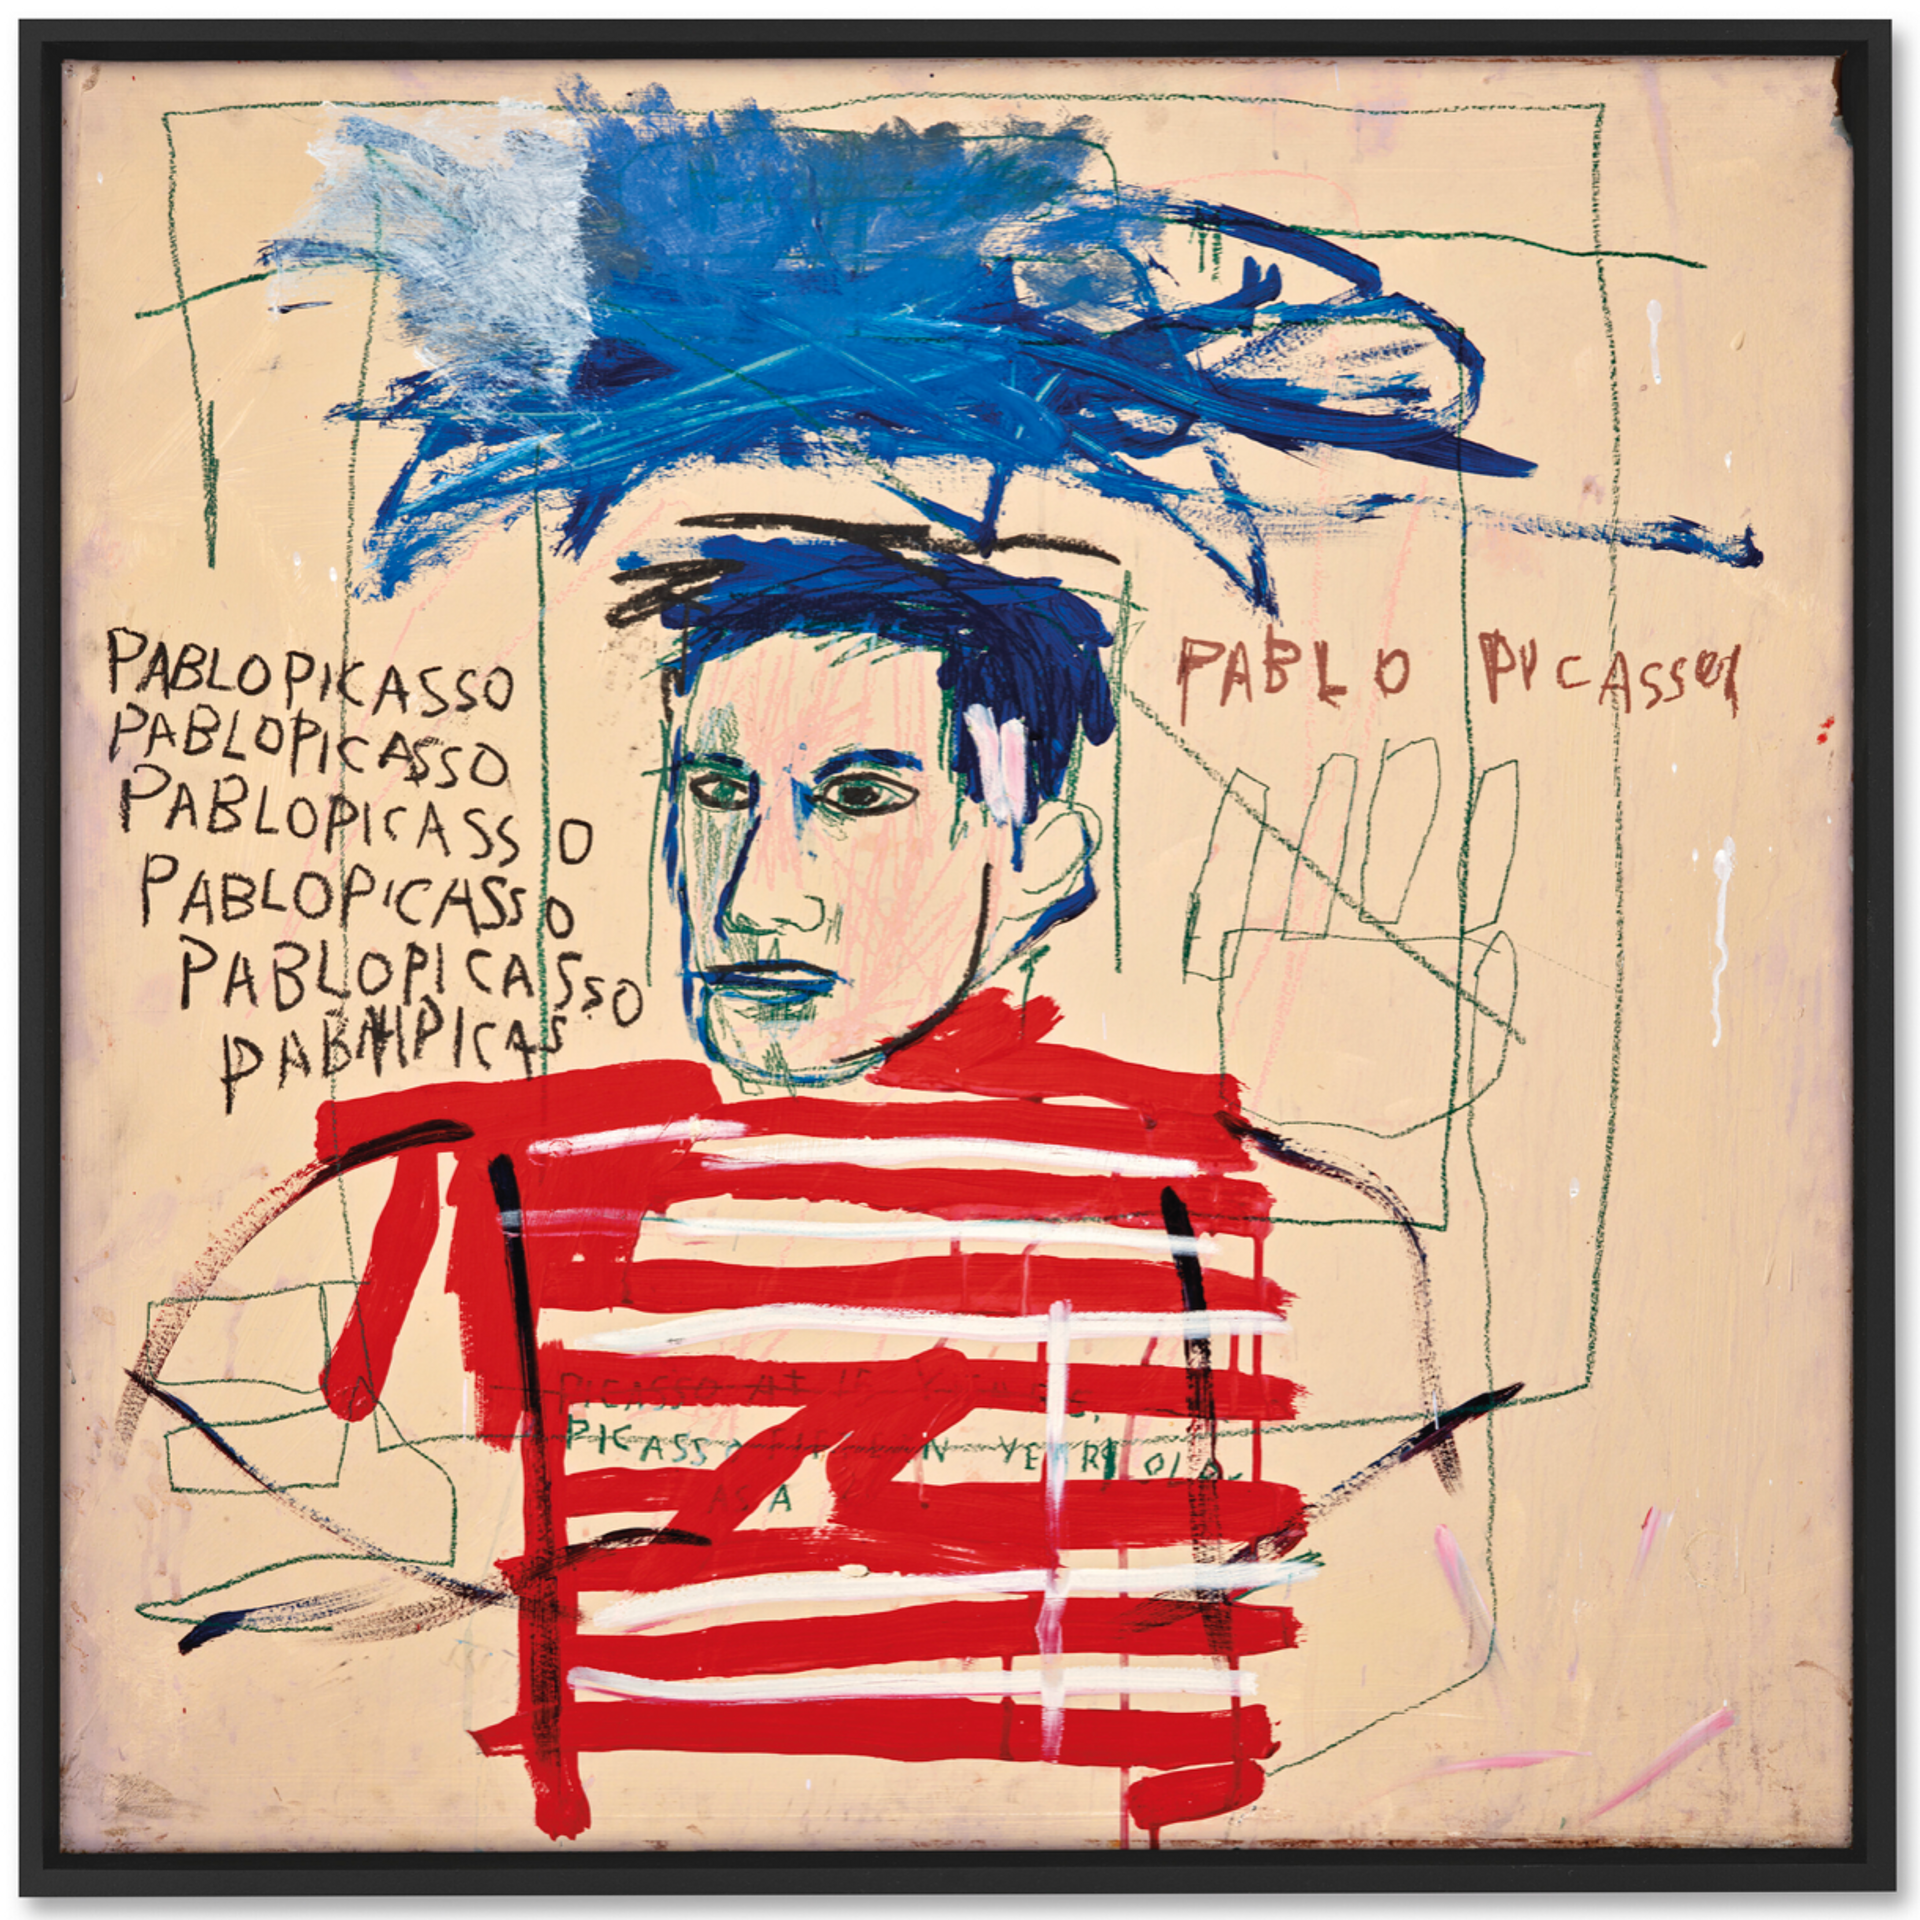 An acrylic and oil work by Jean-Michel Basquiat depicting Pablo Picasso's portrait.